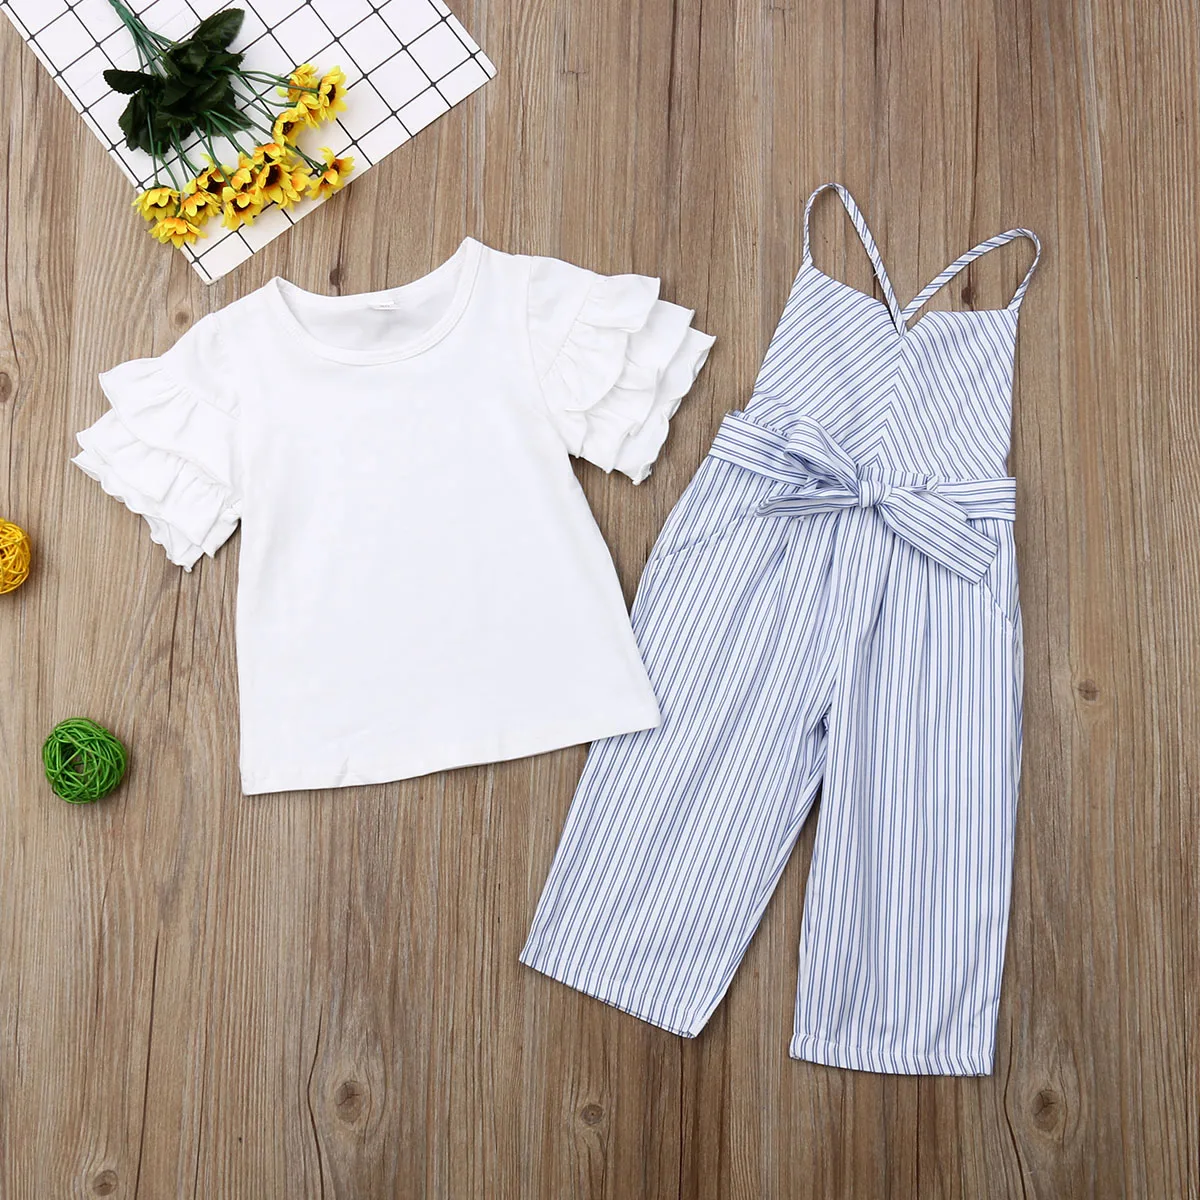 Pudcoco Toddler Baby Girl Clothes Cotton Ruffle T-Shirt Tops Striped Overalls Pants 2Pcs Outfits Summer Clothes